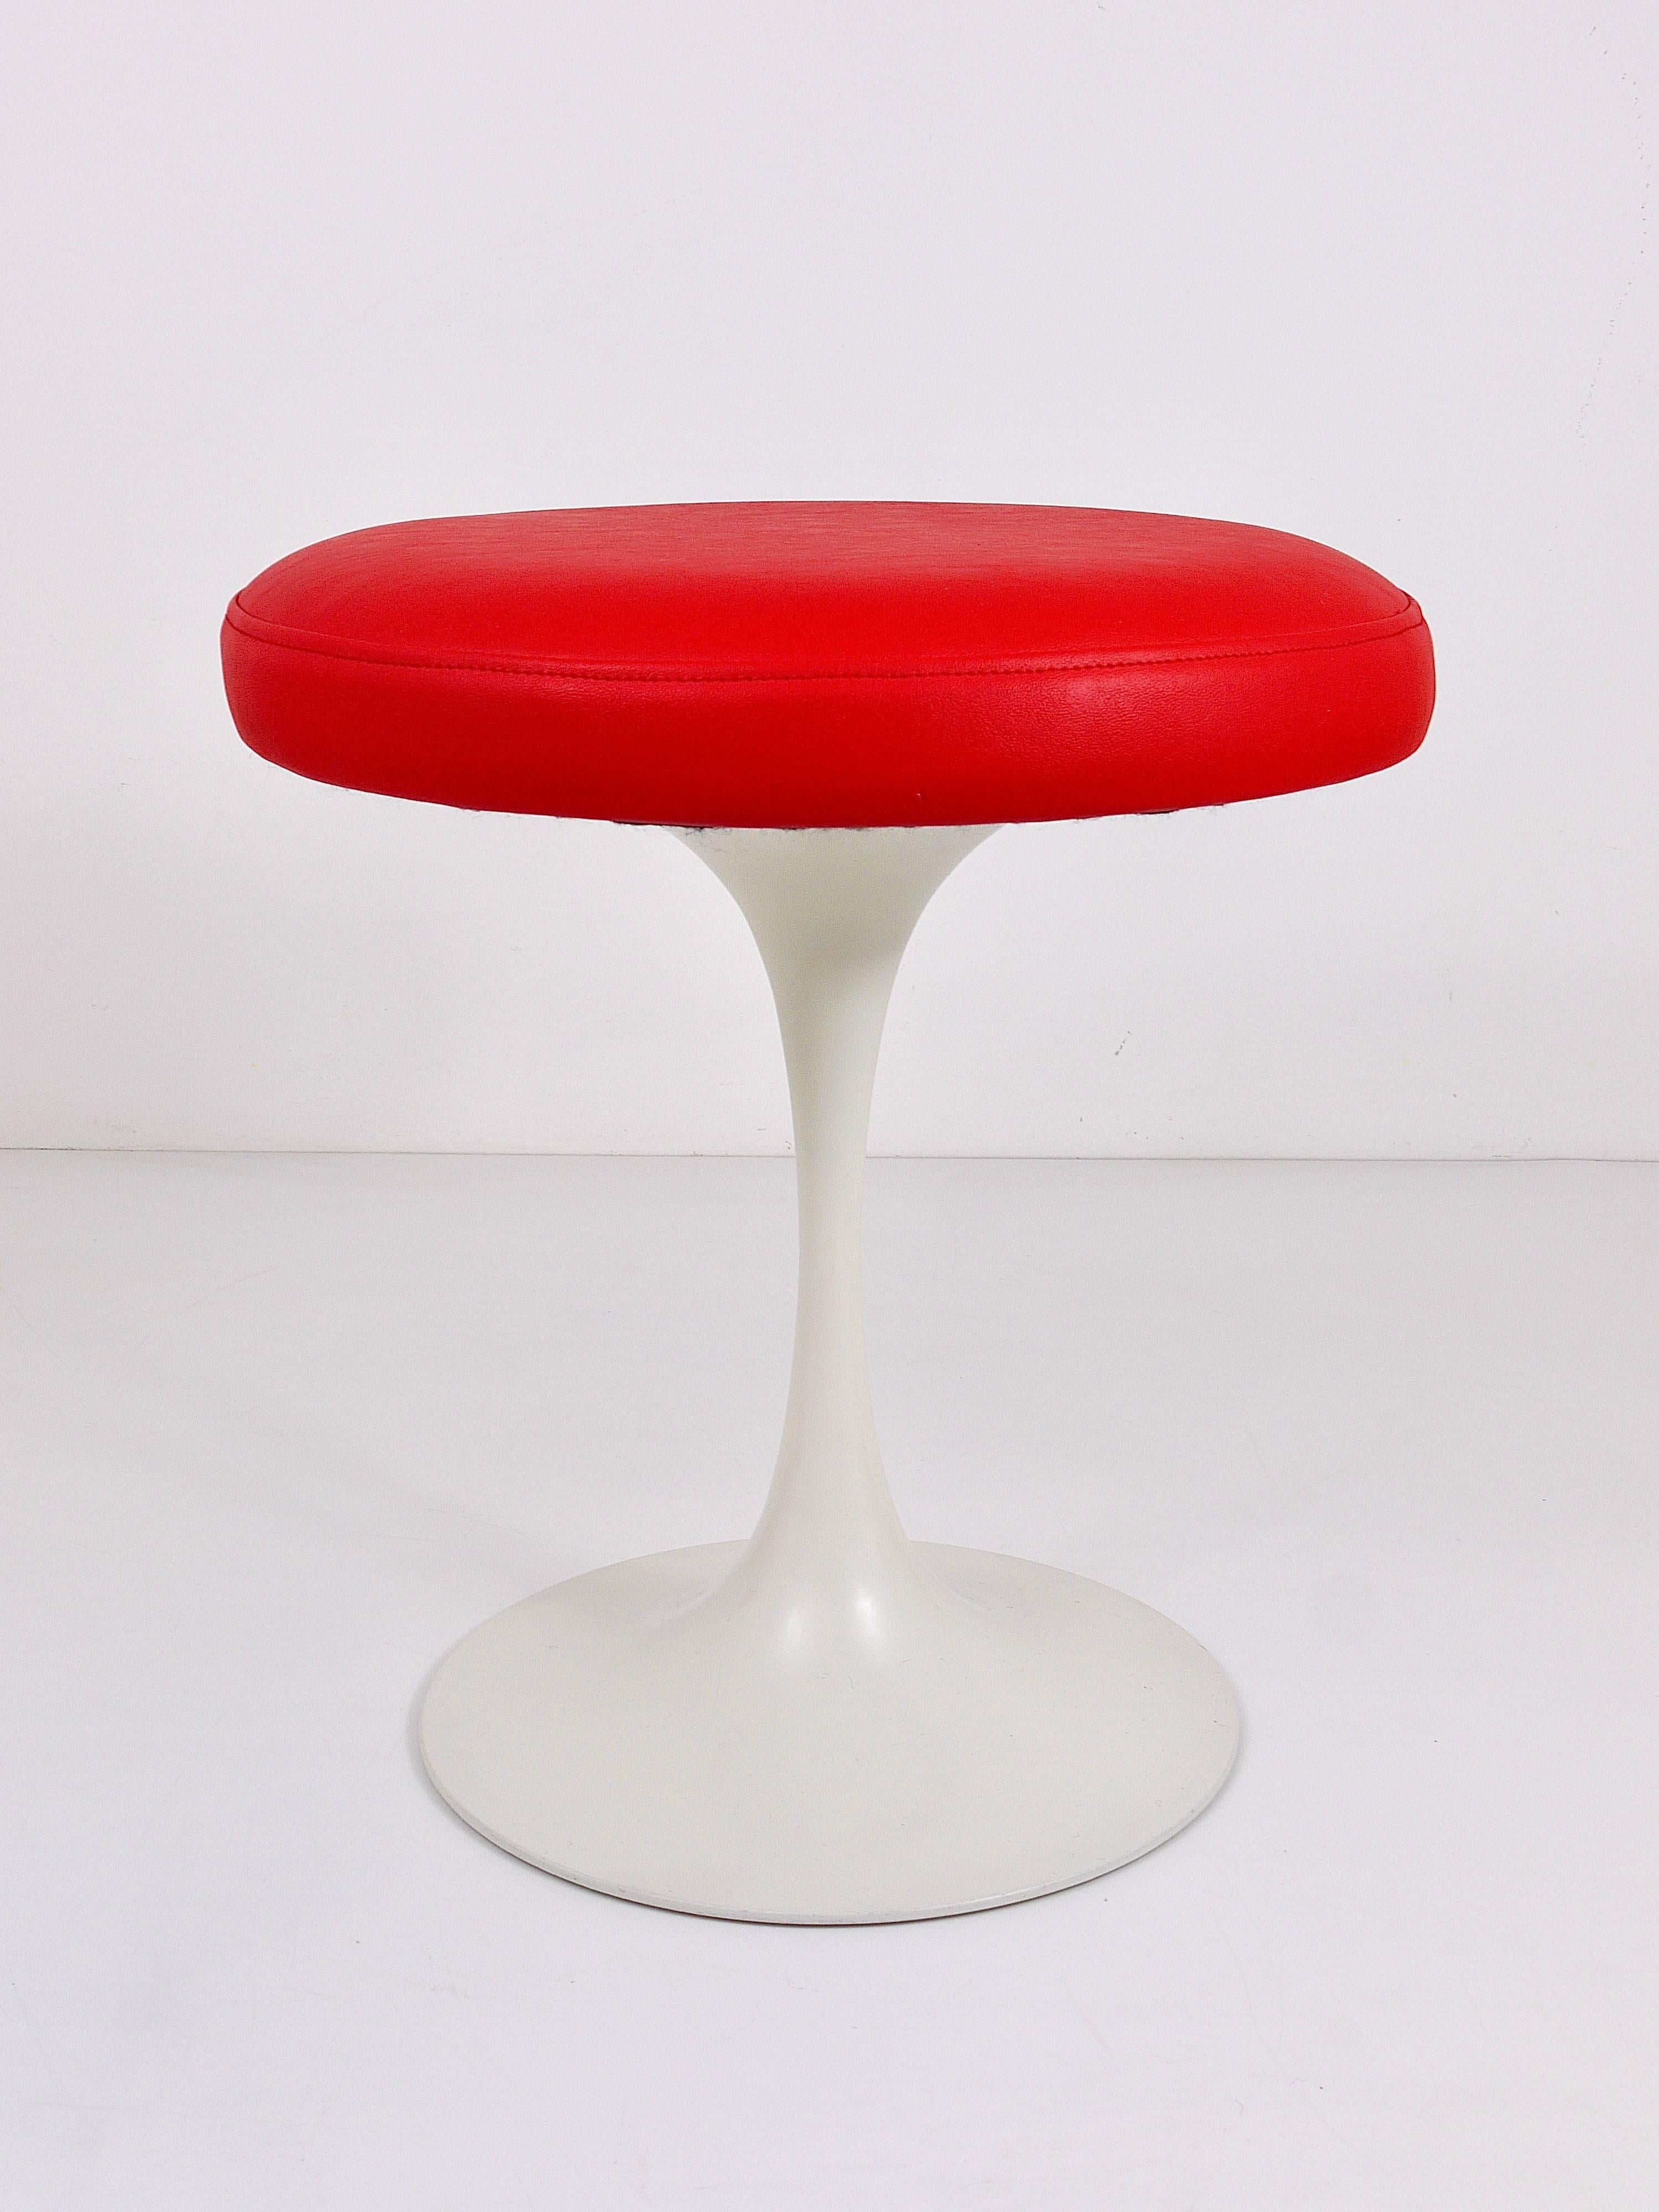 A beautiful space age stool from the 1960s, featuring a white tulip base and vibrant red faux leather upholstery. This piece, designed by Maurice Burke for Arkana in the United Kingdom, echoes the style of Eero Saarinen's designs for Knoll. The